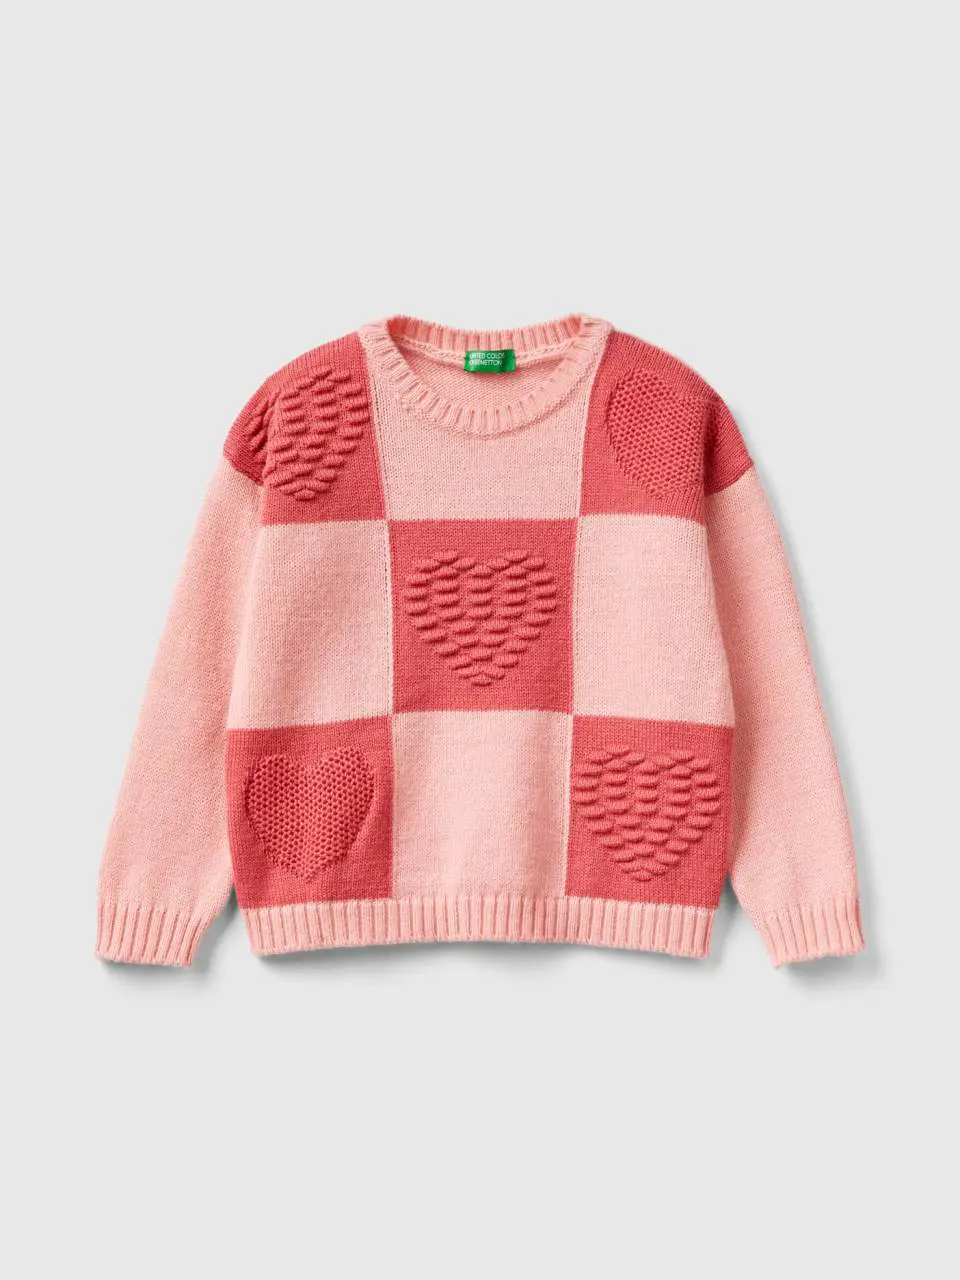 Benetton checkered sweater with hearts. 1